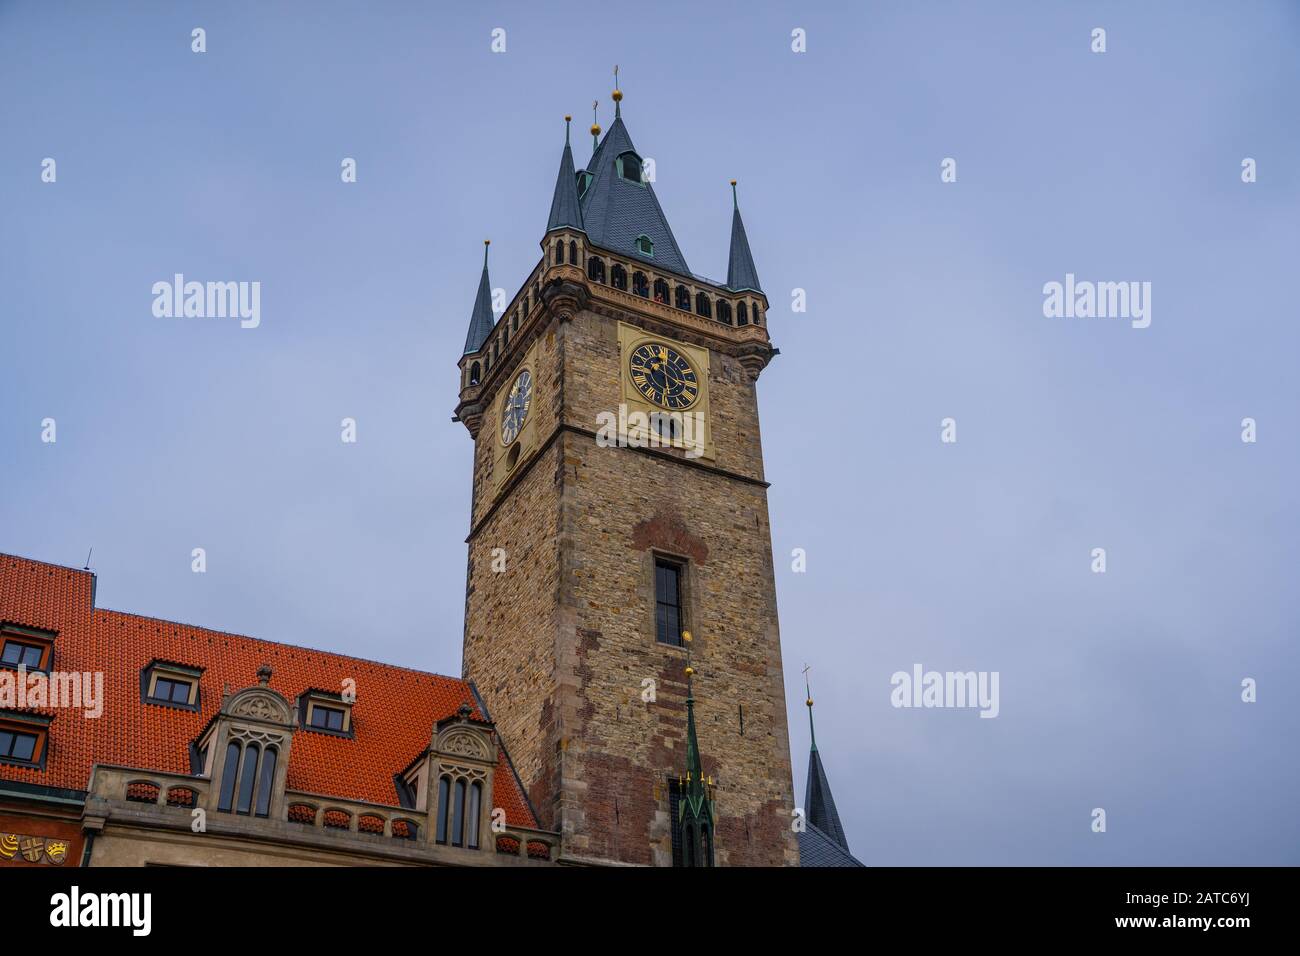 The Old Town Hall Tower with the Horologe, the medieval astronomic clock, Prague, Czech Republic Stock Photo